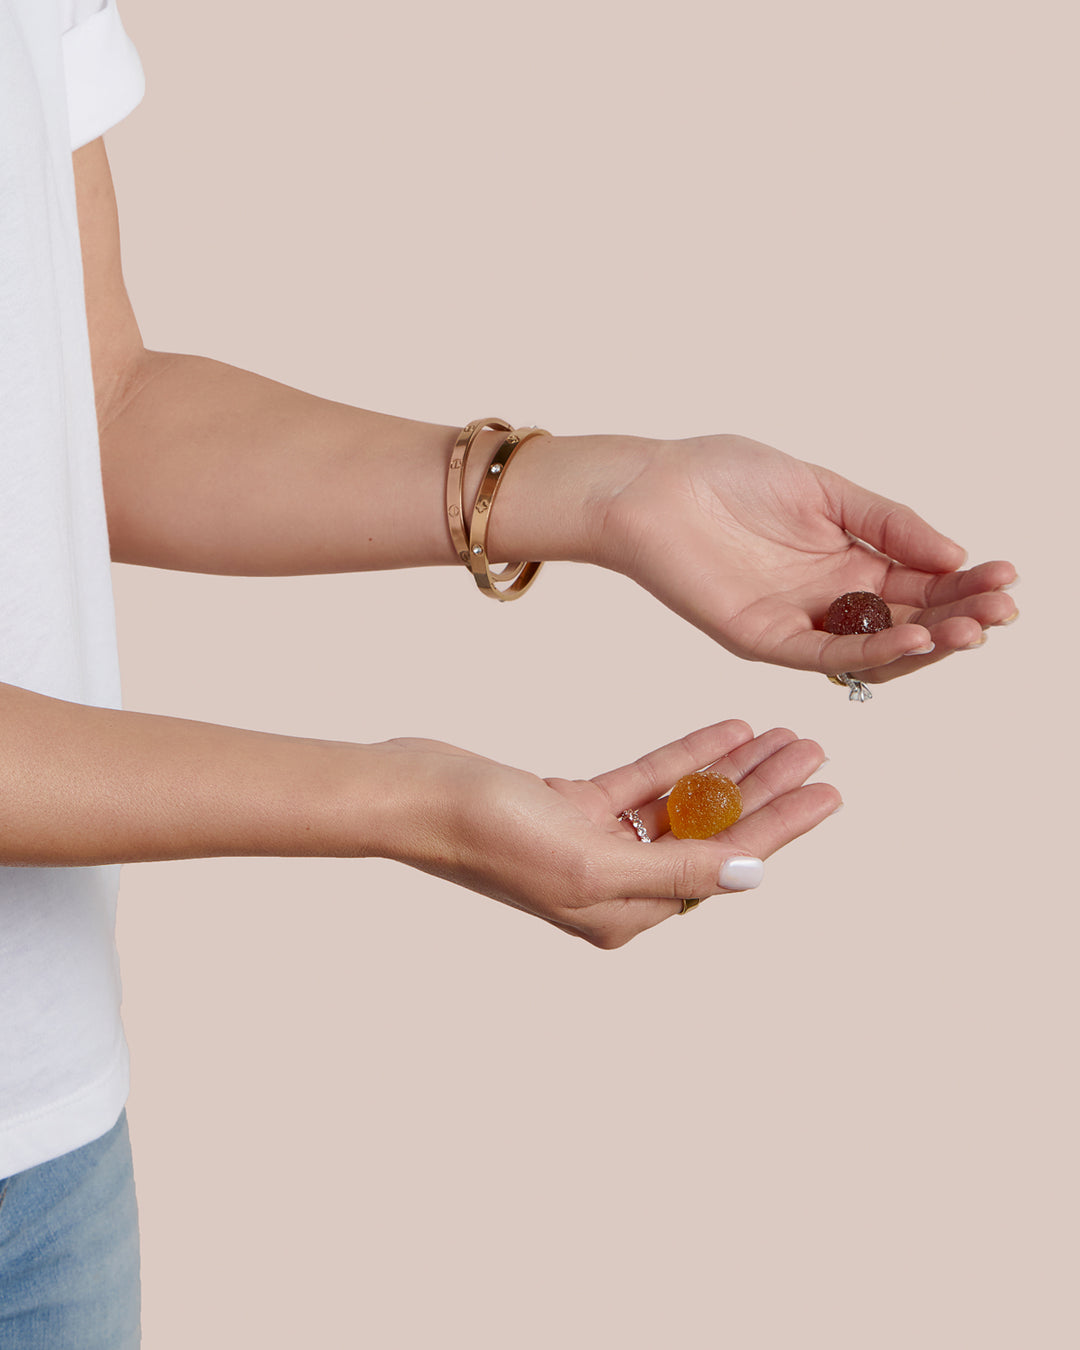 A woman holding a Winged Relaxation gummy and a Winged Sleep gummy in the palm of each hand